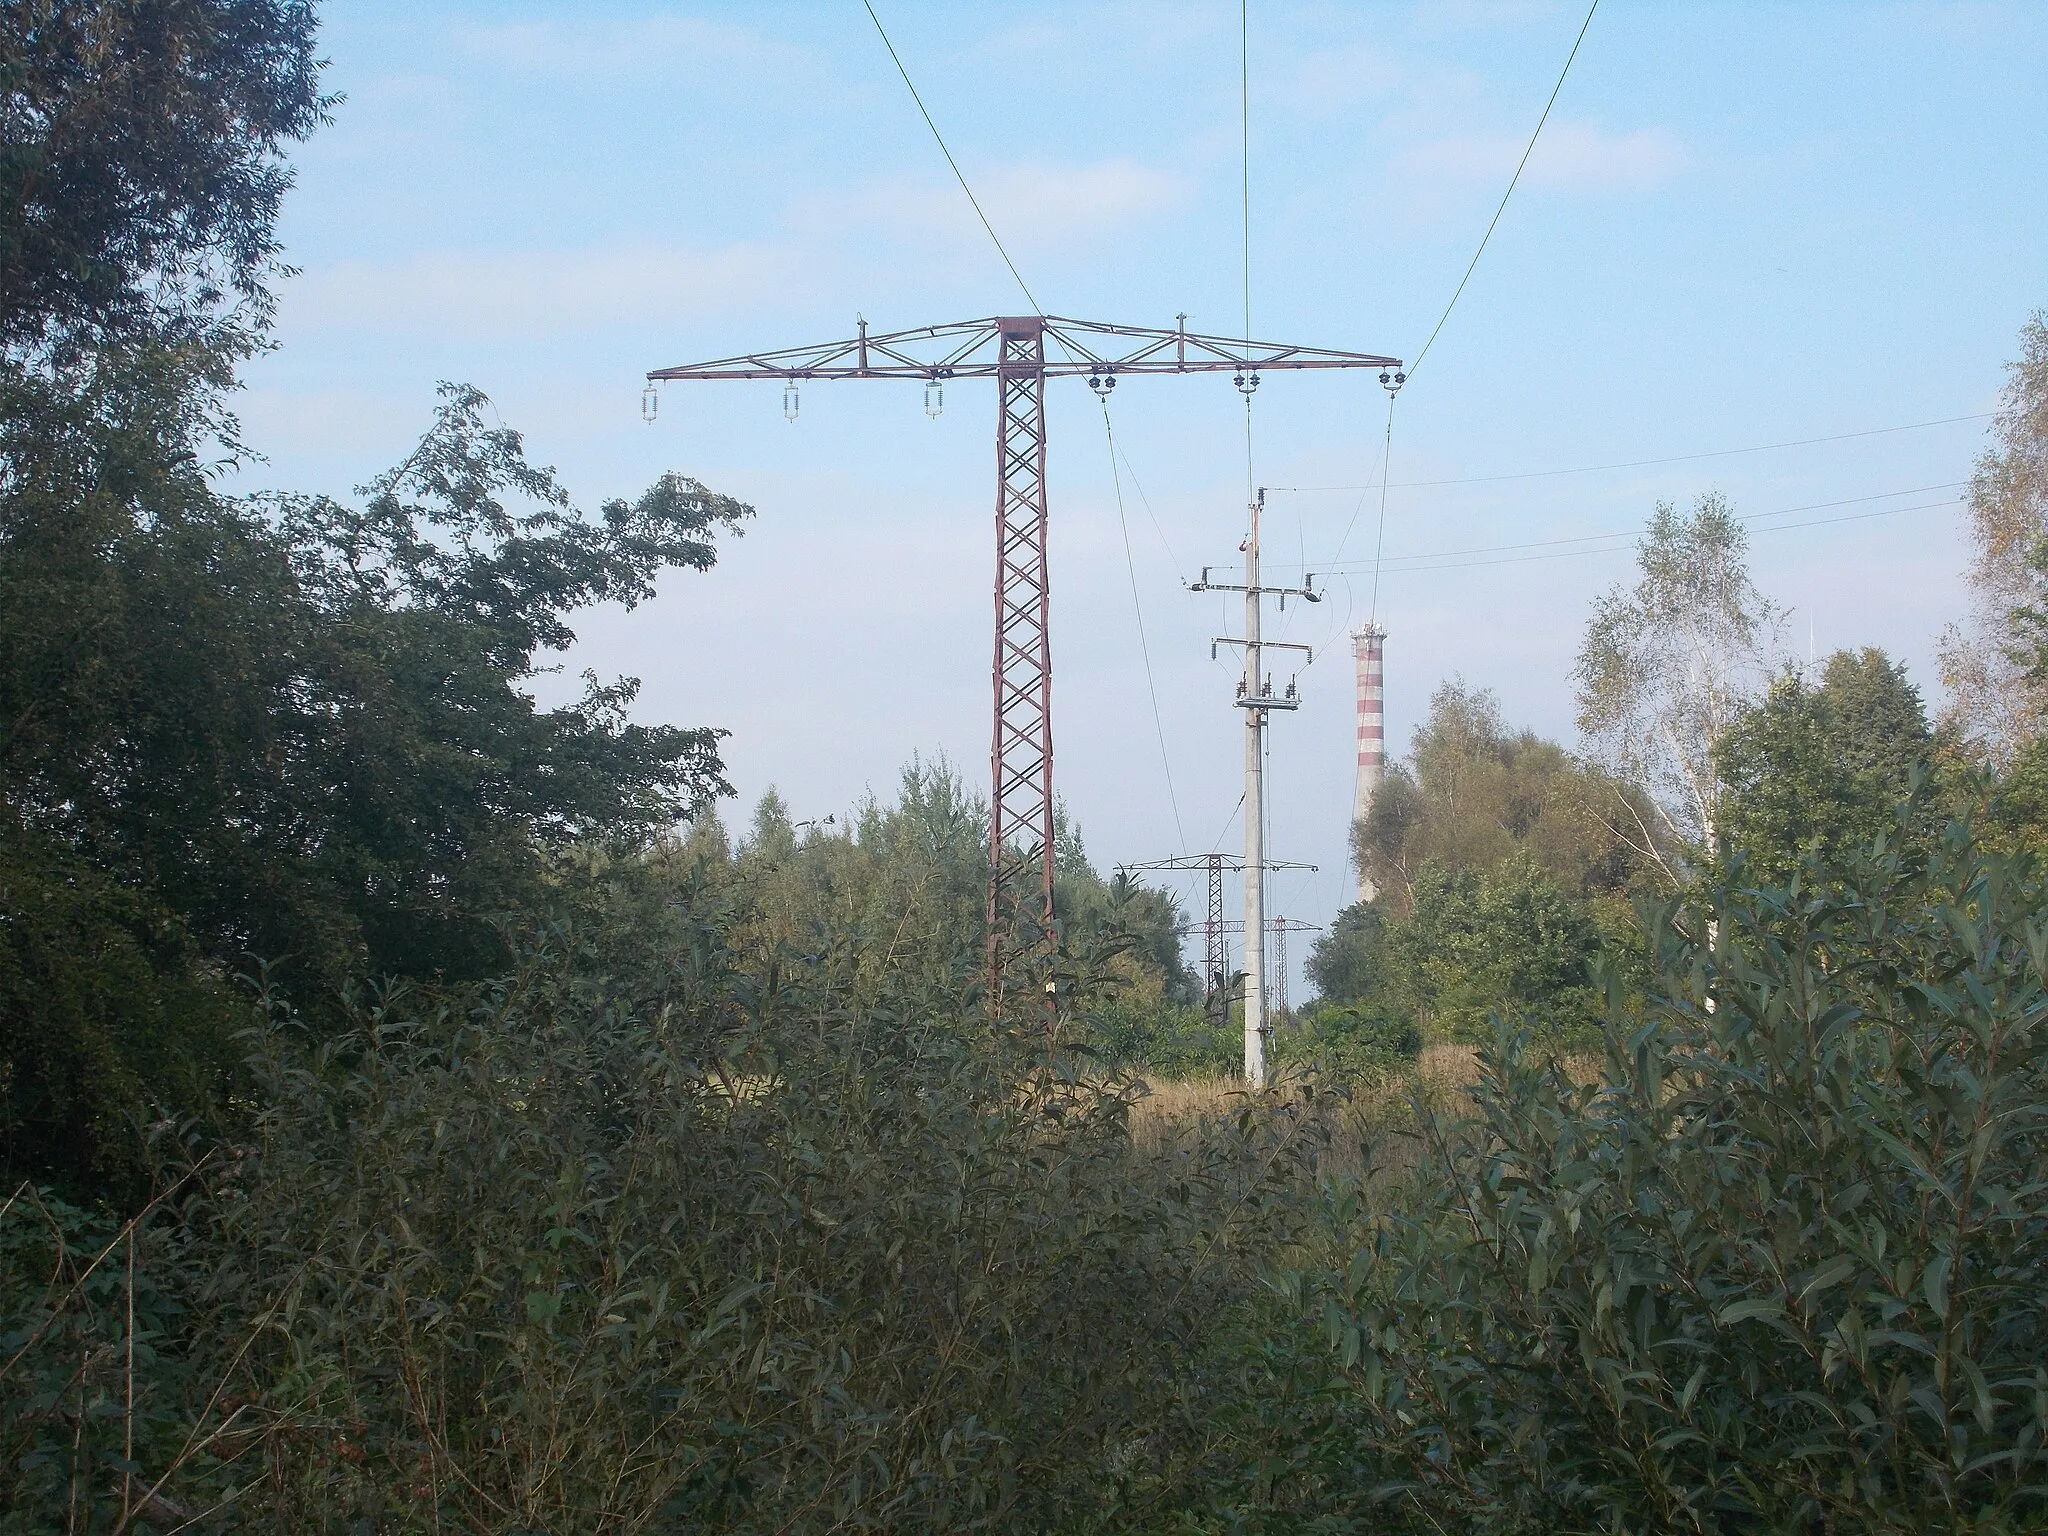 Photo showing: 30kV suspension towers of the Märkisches Elektrizitätswerk. One side usused, though insulators remained. South of Bialogard.